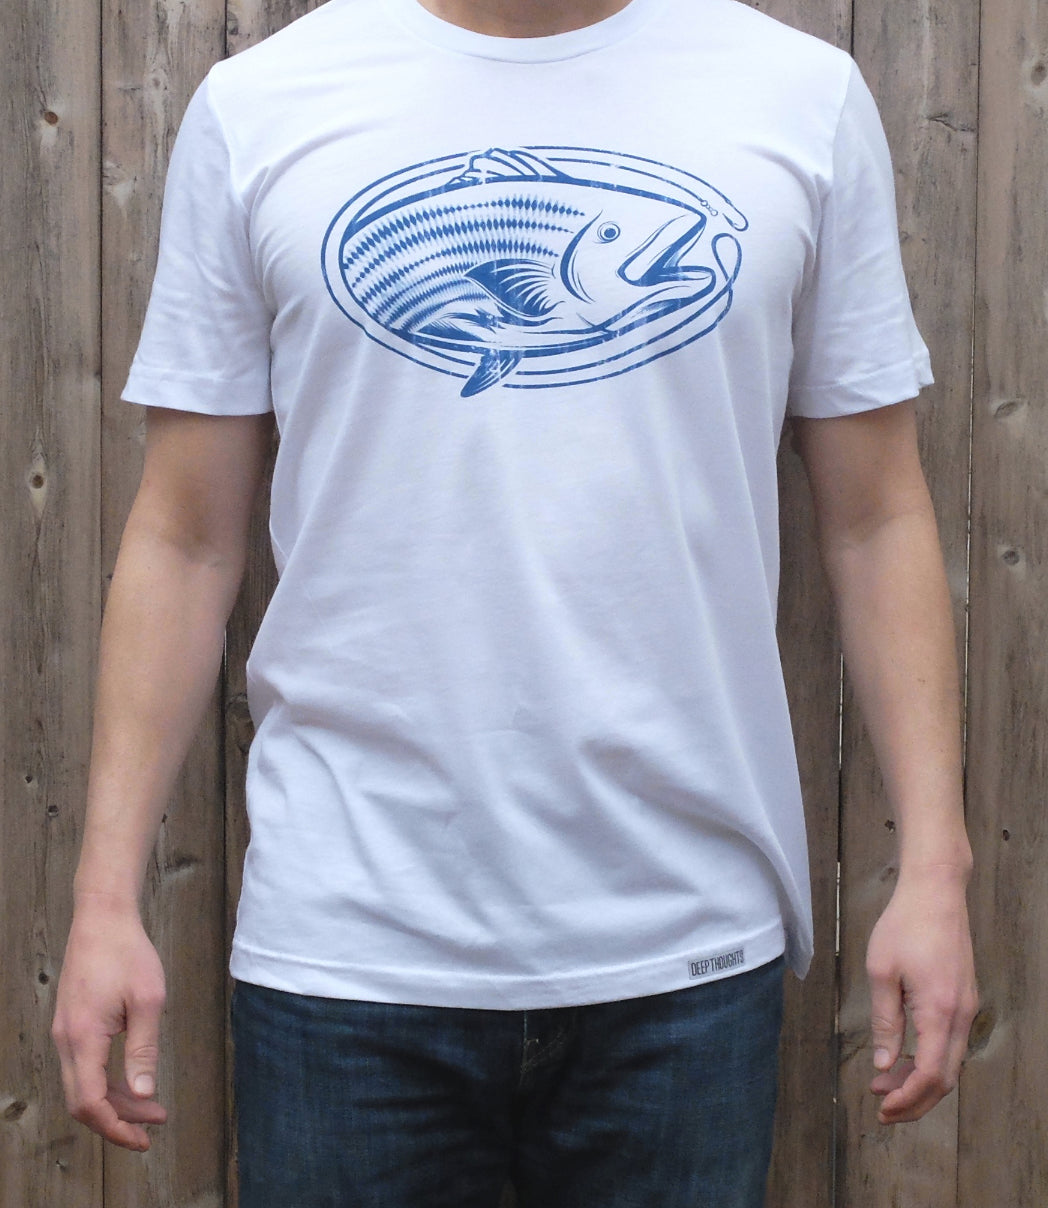 man wearing white cotton t-shirt with oval shaped blue striped bass fishing graphic